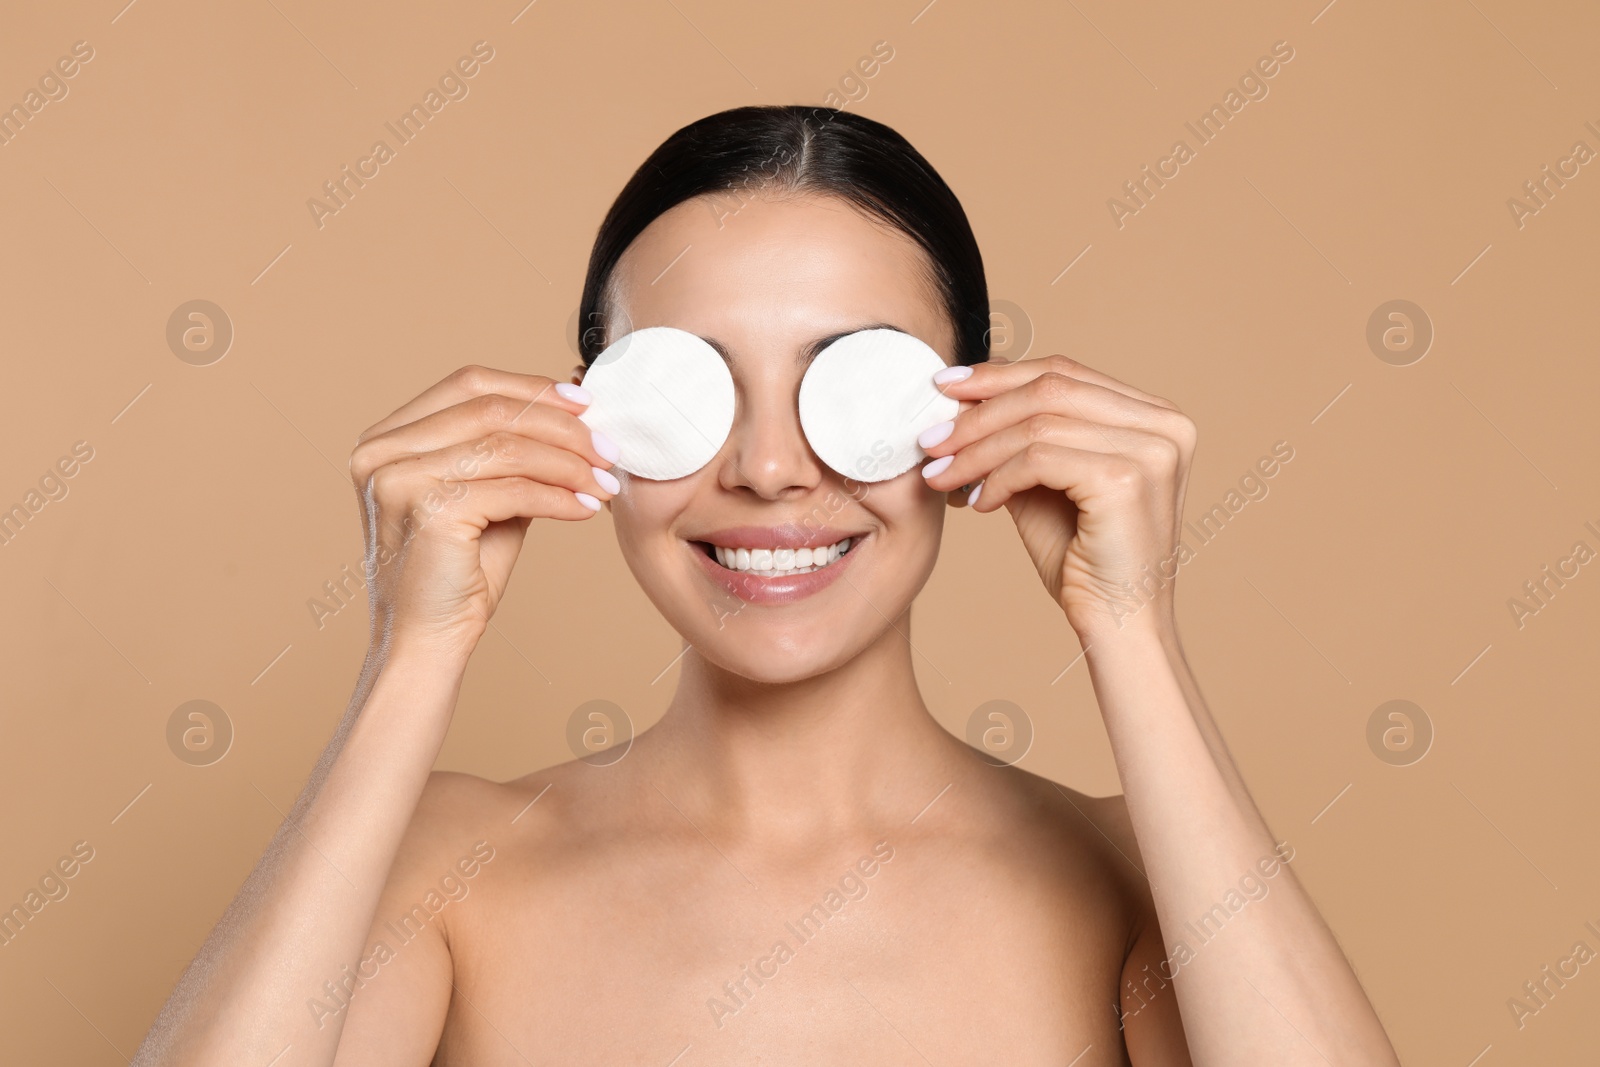 Photo of Young woman using cotton pads with micellar water on beige background